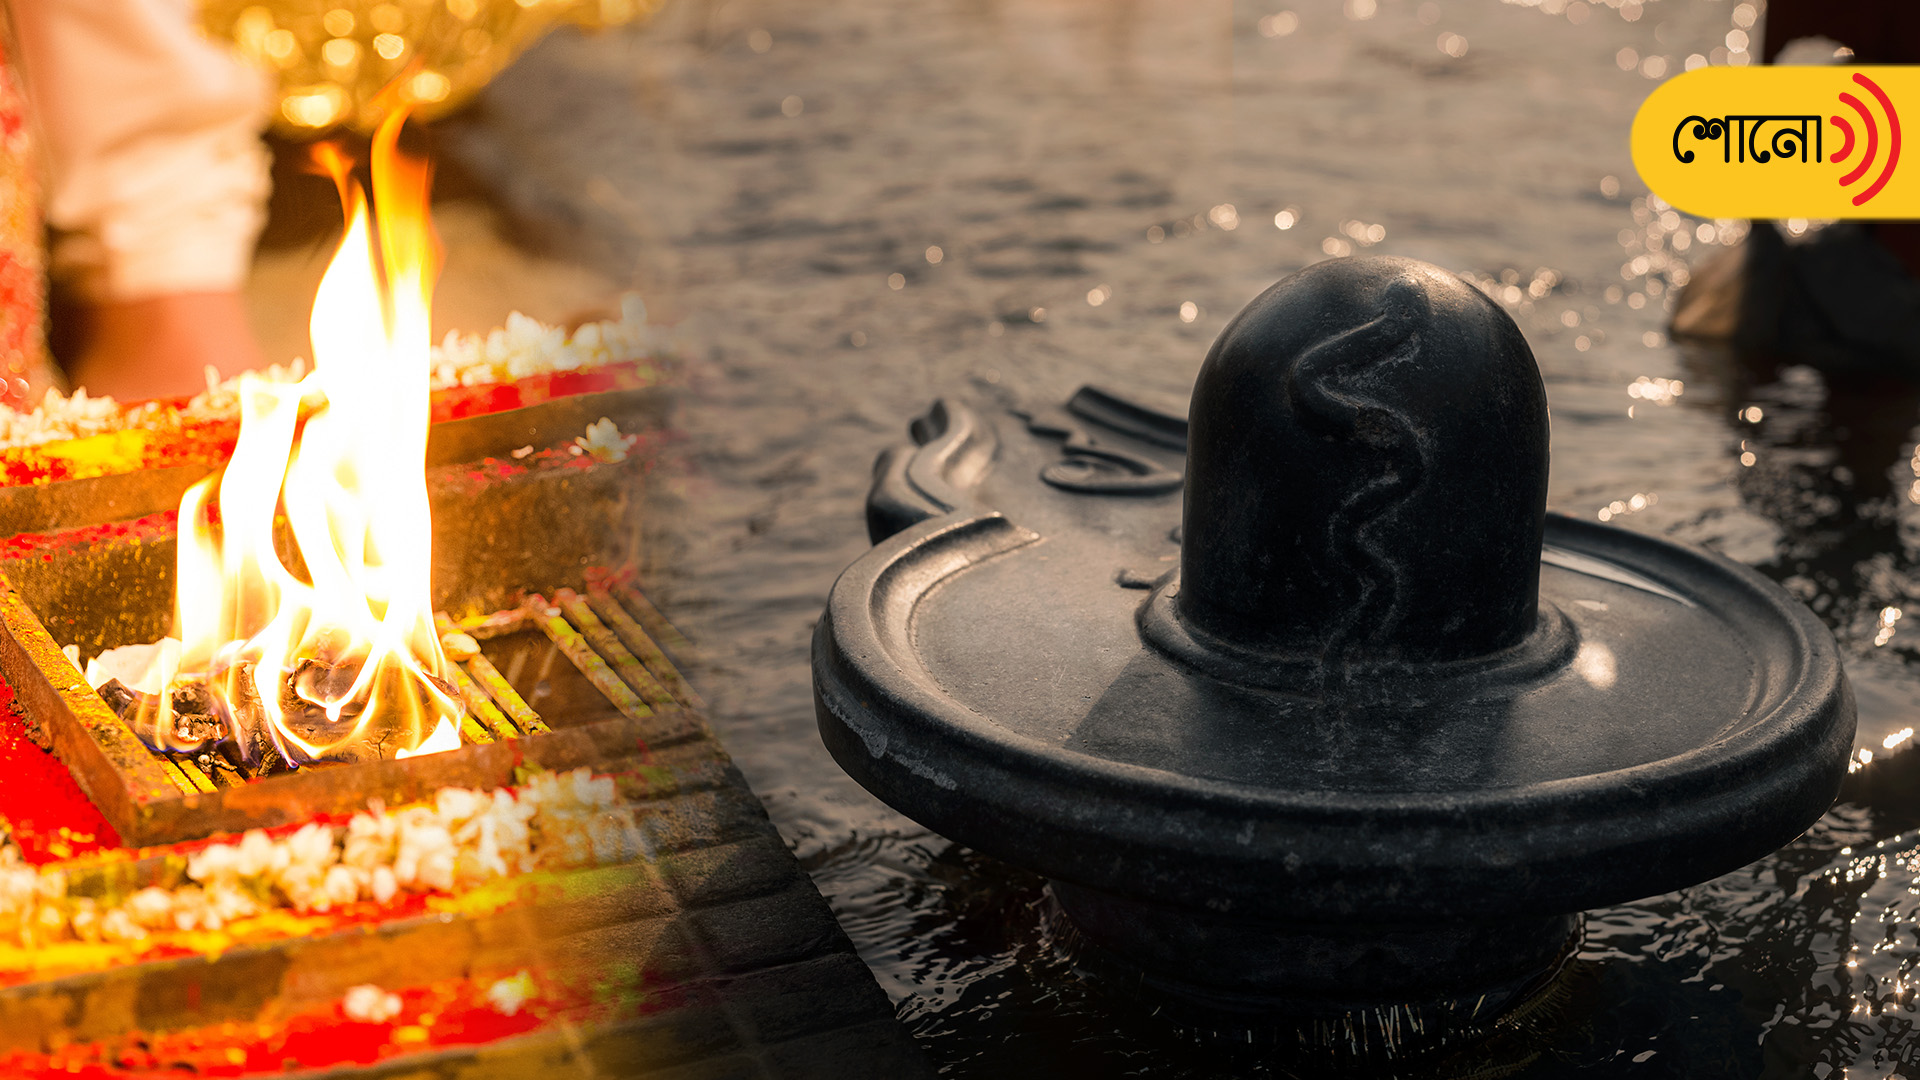 Youth Steals Shivling From TempleAfter His Wish For Marriage Not Fulfilled